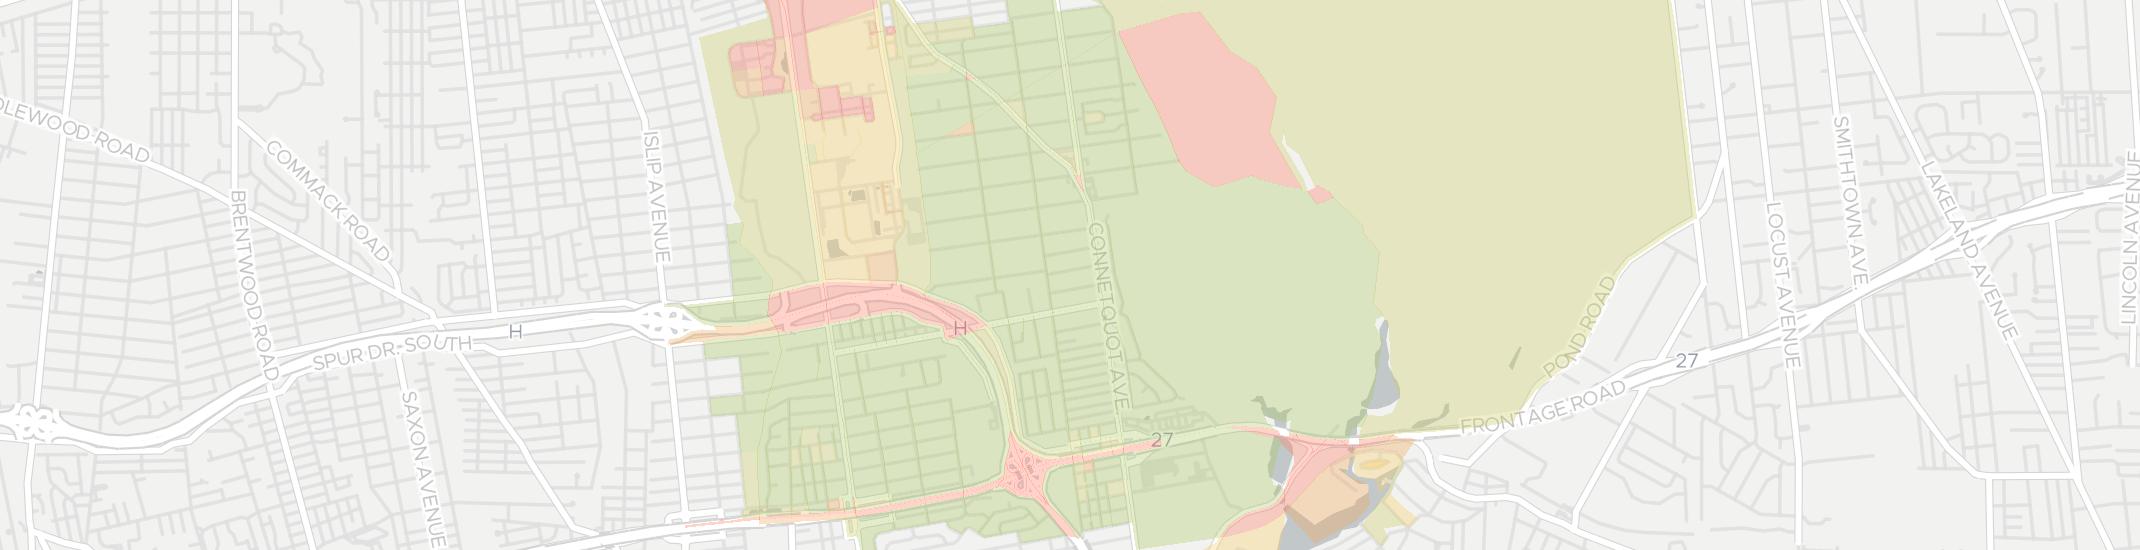 Islip Terrace Internet Competition Map. Click for interactive map